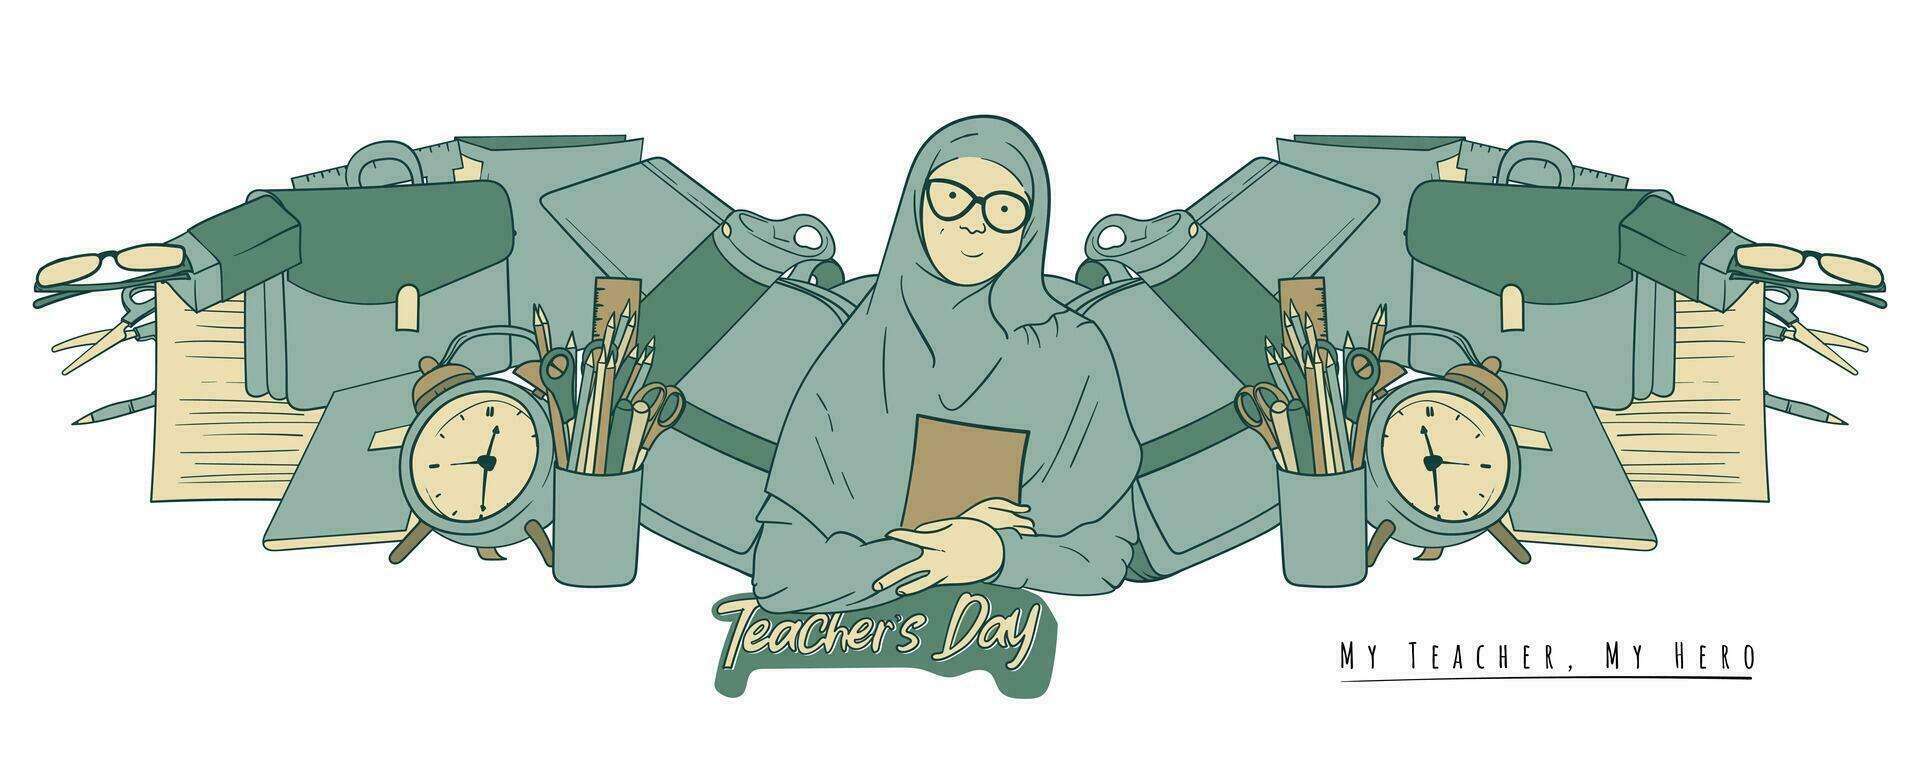 Muslim female teacher with learning tools that form wings design for world teacher's day template vector